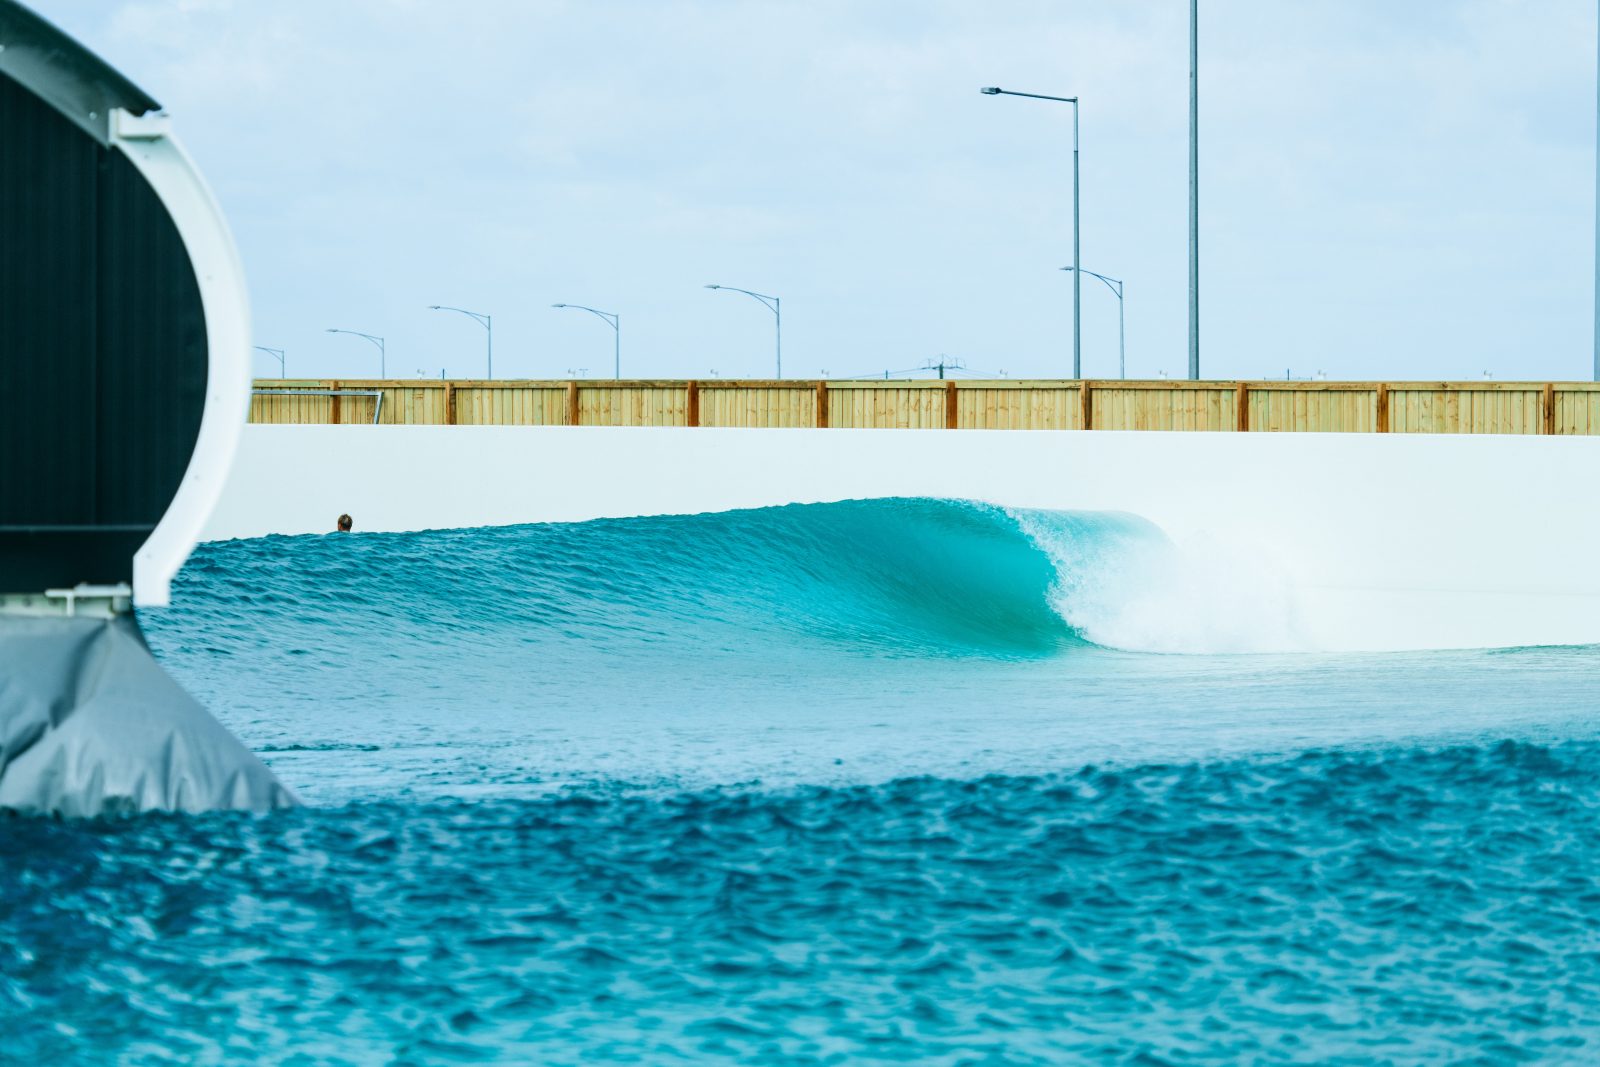 URBNSURF Melbourne Opens January 6th